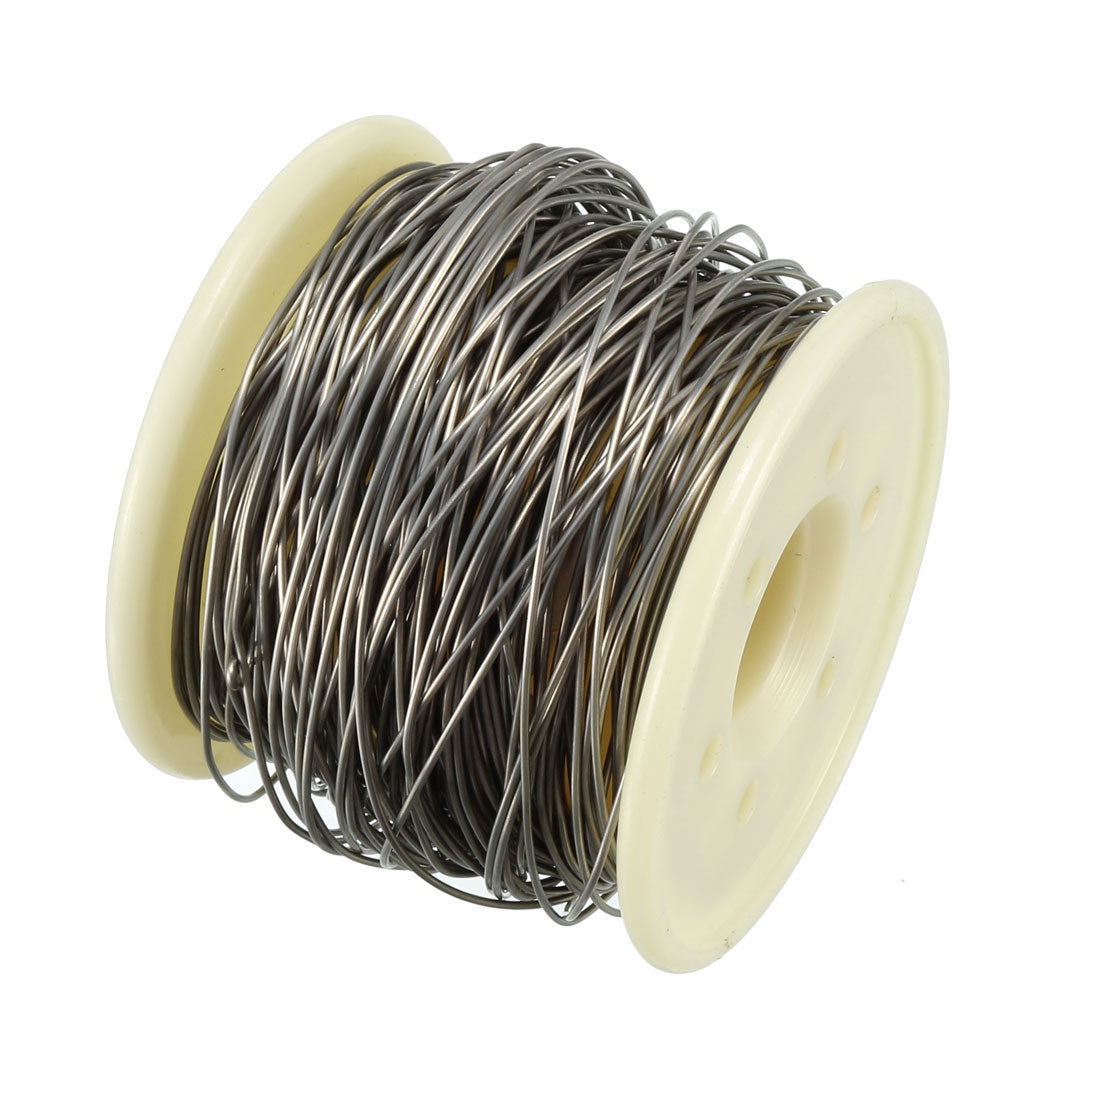 uxcell Uxcell 0.7mm 21AWG Heating Resistor Wire Nichrome Resistance Wires for Heating Elements 65.6ft